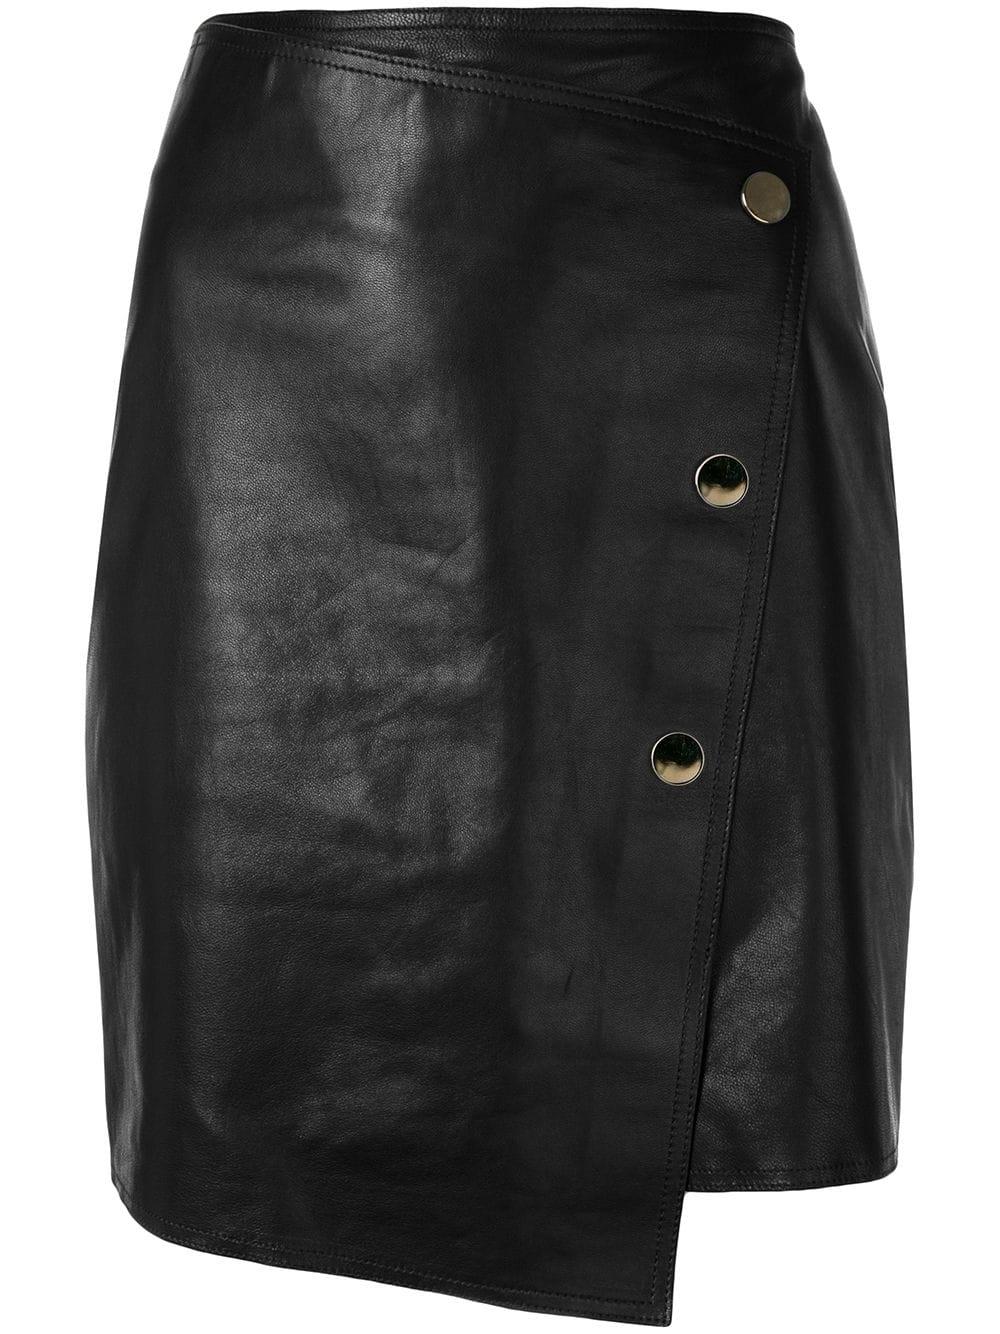 Vanessa Bruno Leather Asymmetric Fitted Skirt in Black - Lyst